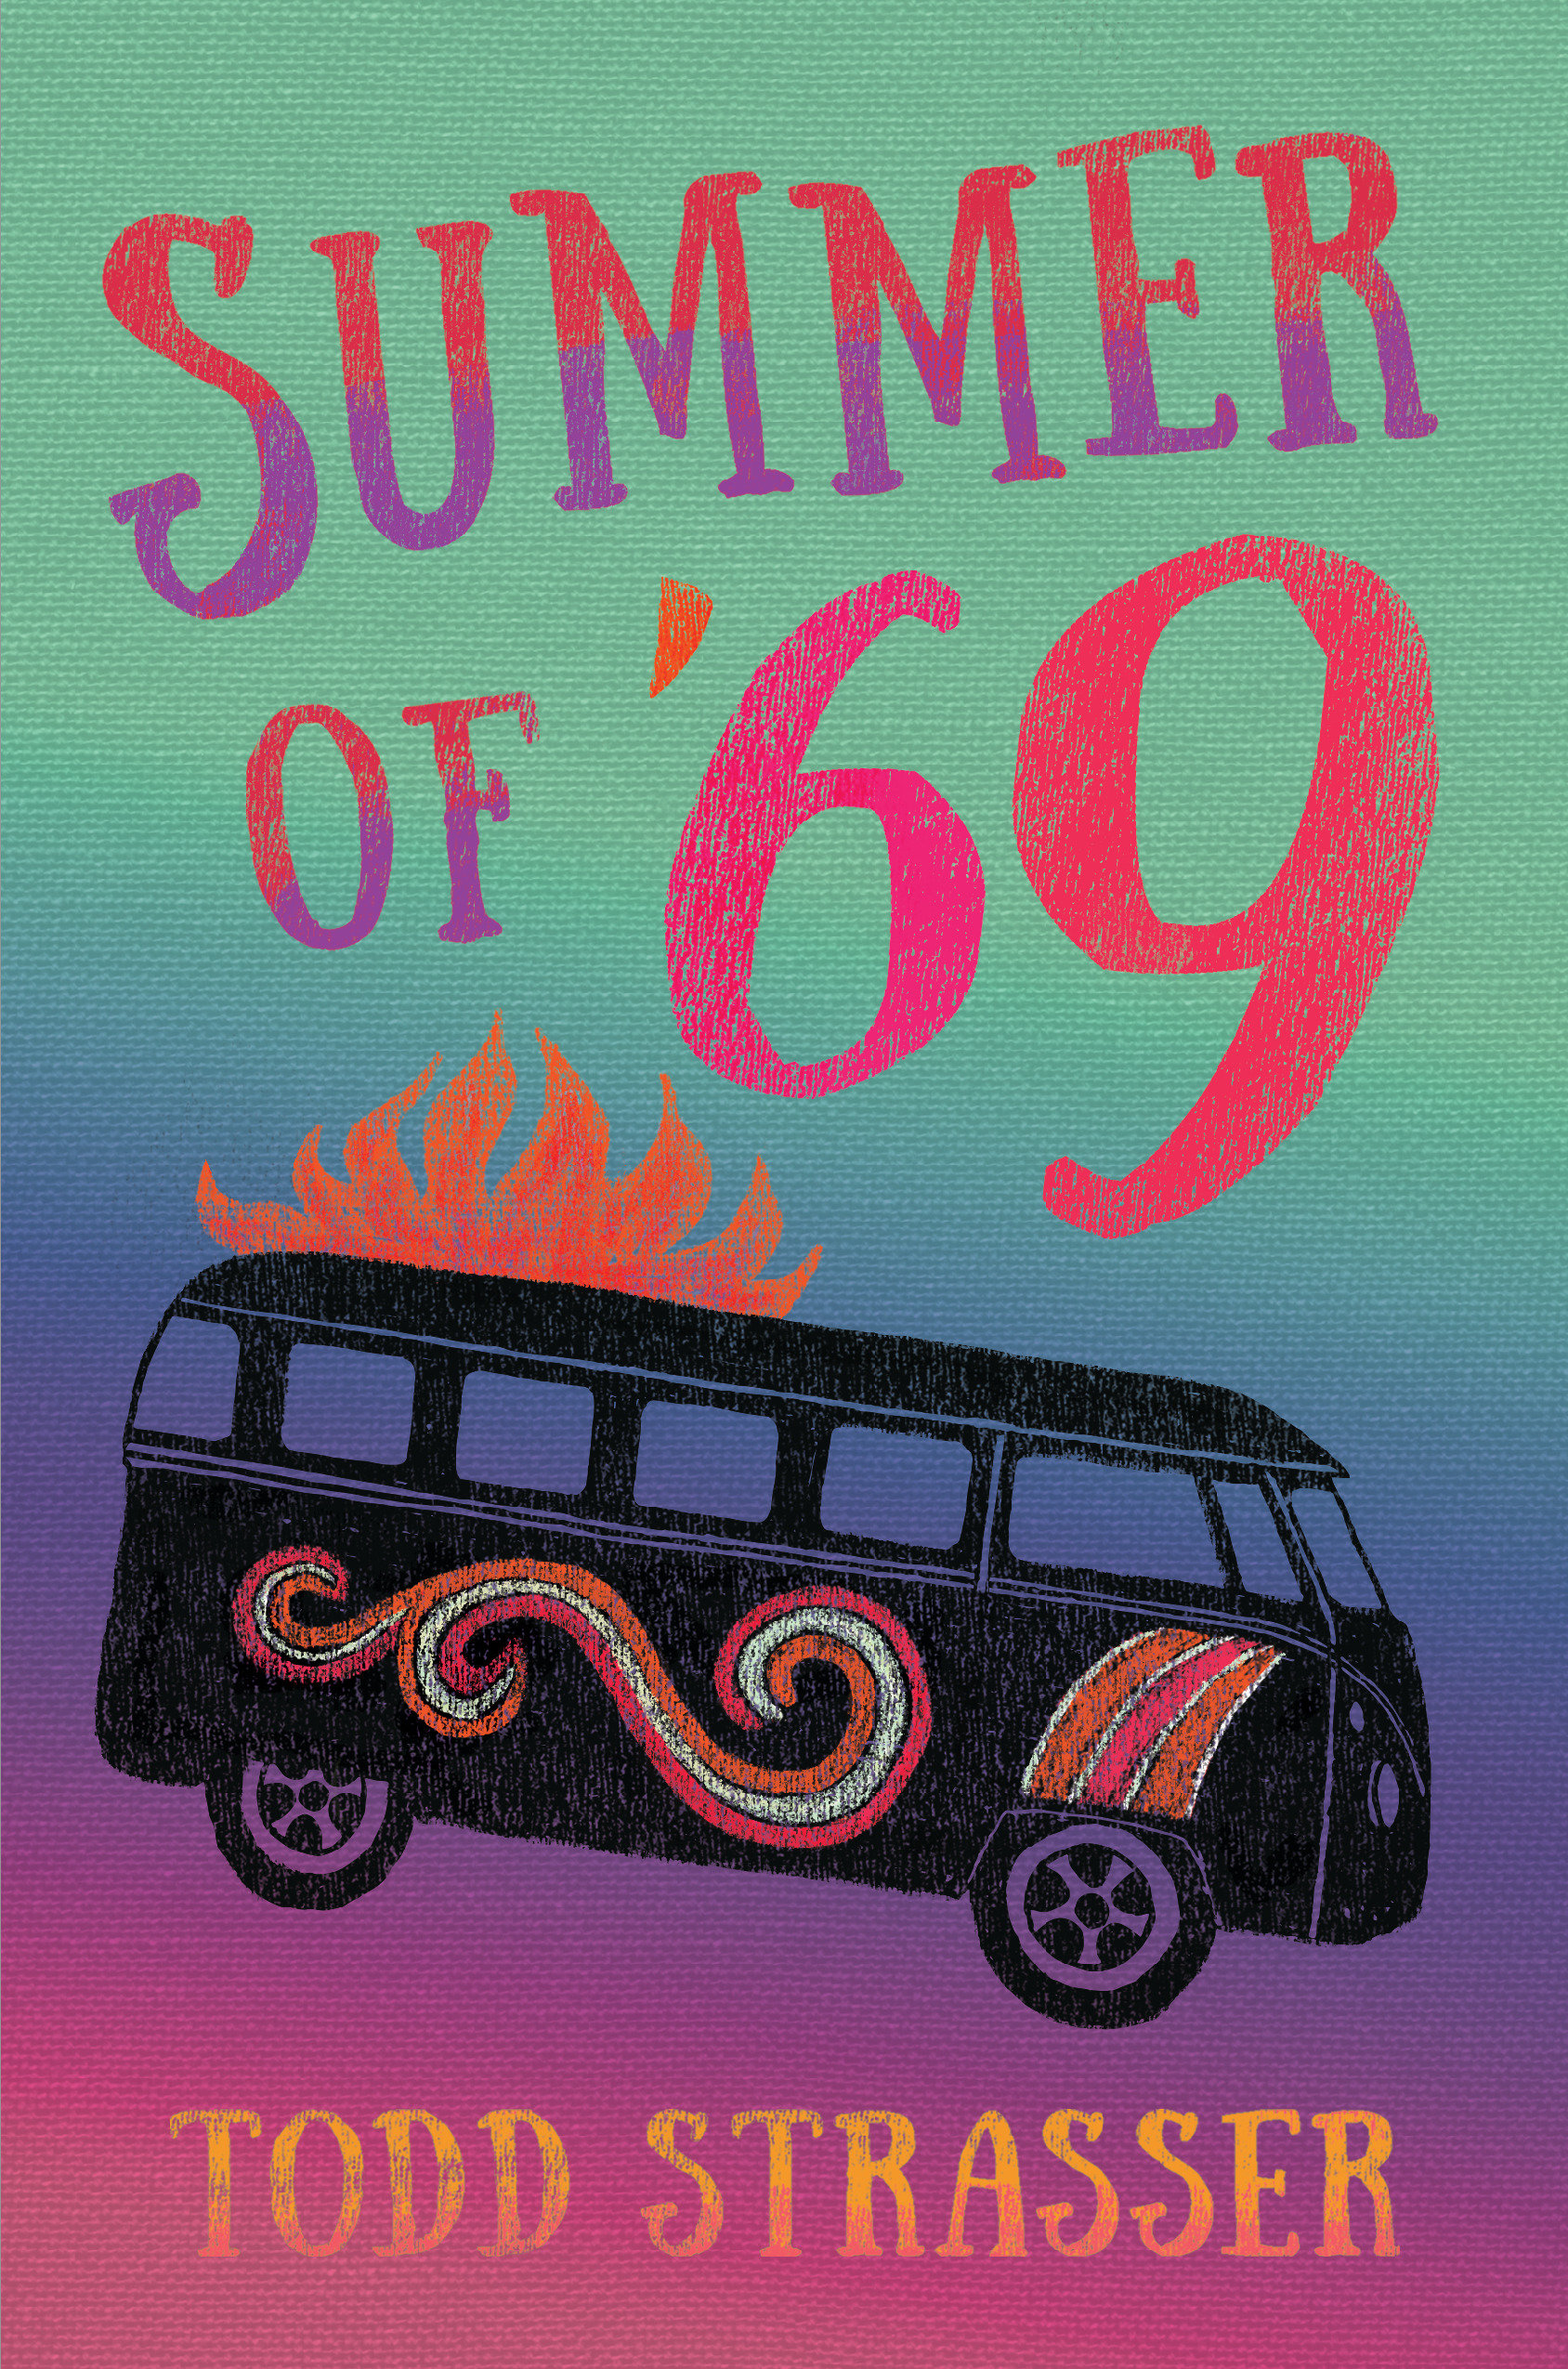 Summer Of '69 (Hardcover Book)